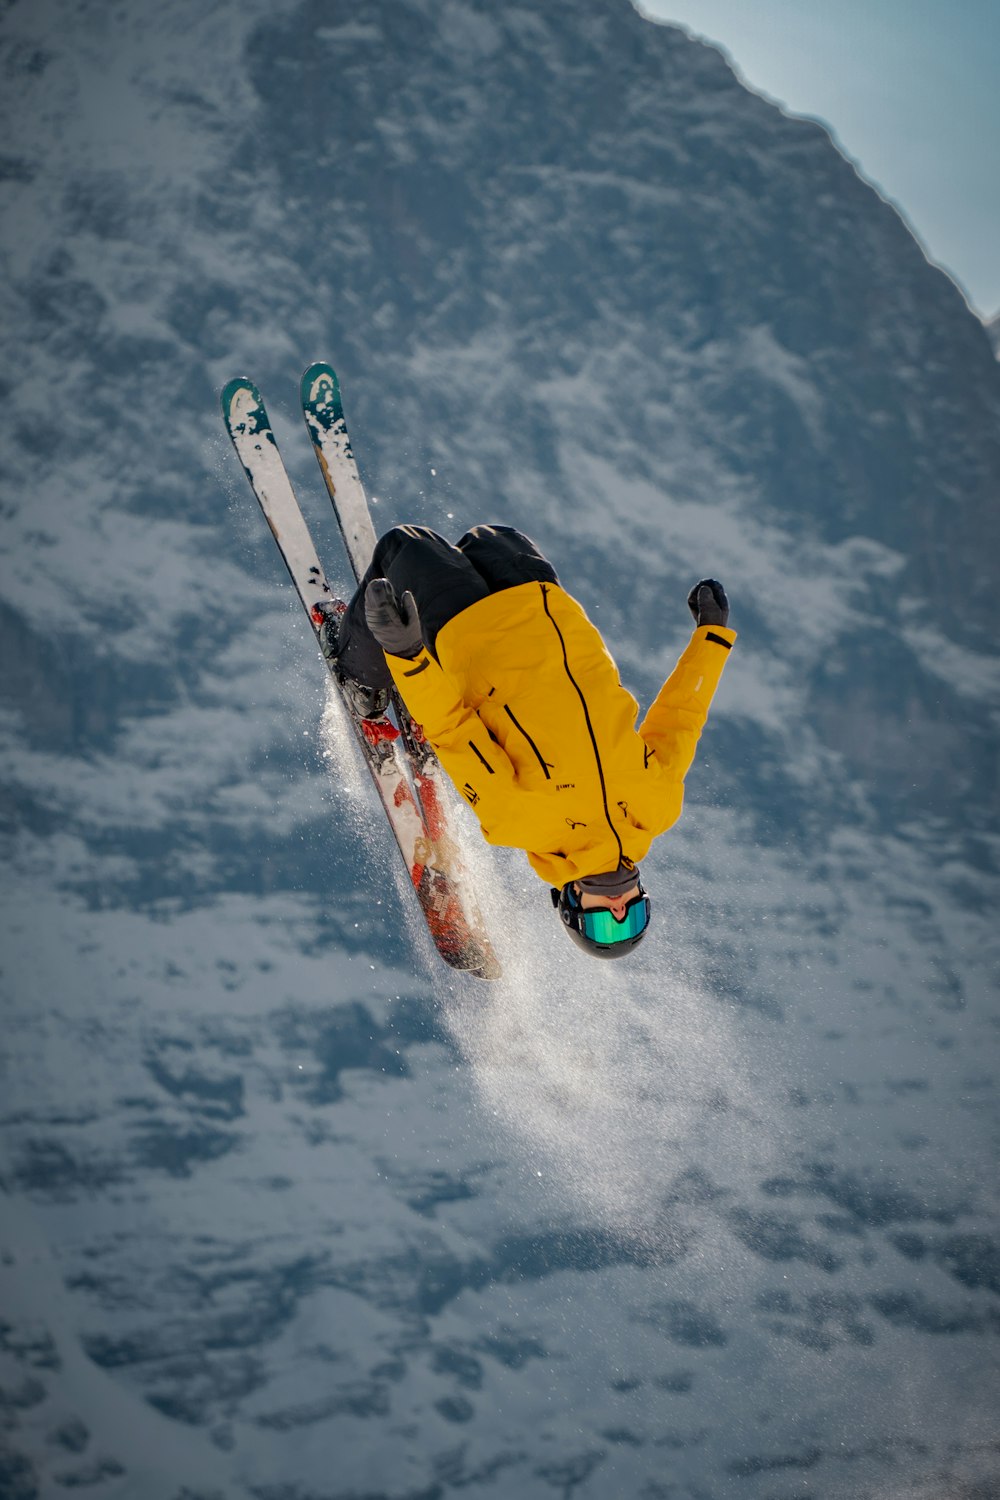 person in yellow jacket and black pants riding yellow snowboard on snow covered ground during daytime